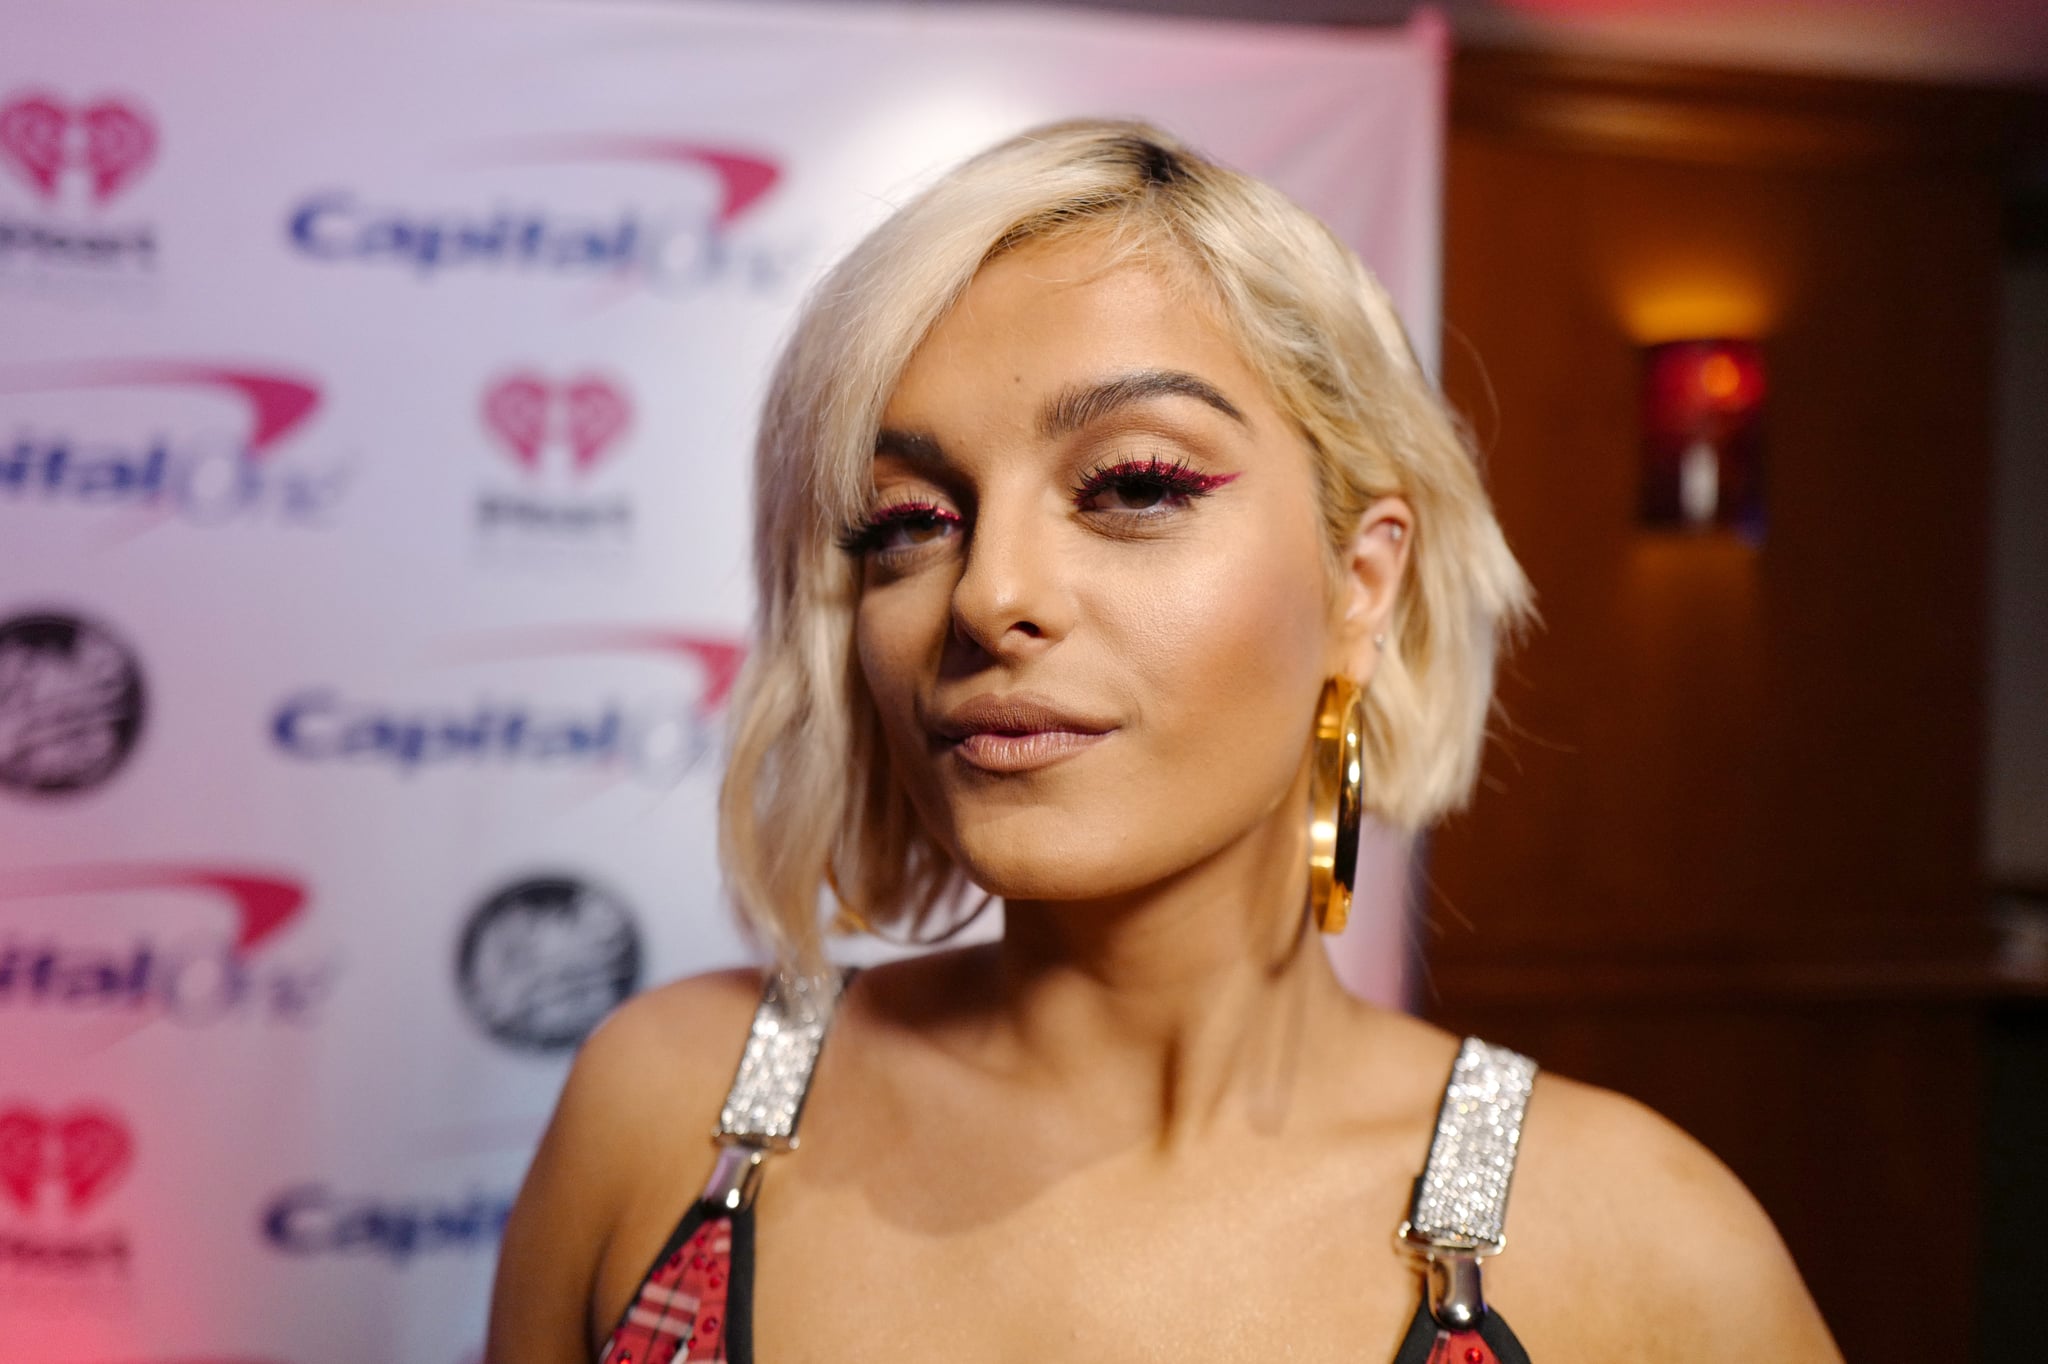 Bebe Rexha defends her father after he compared video to 'pornography'